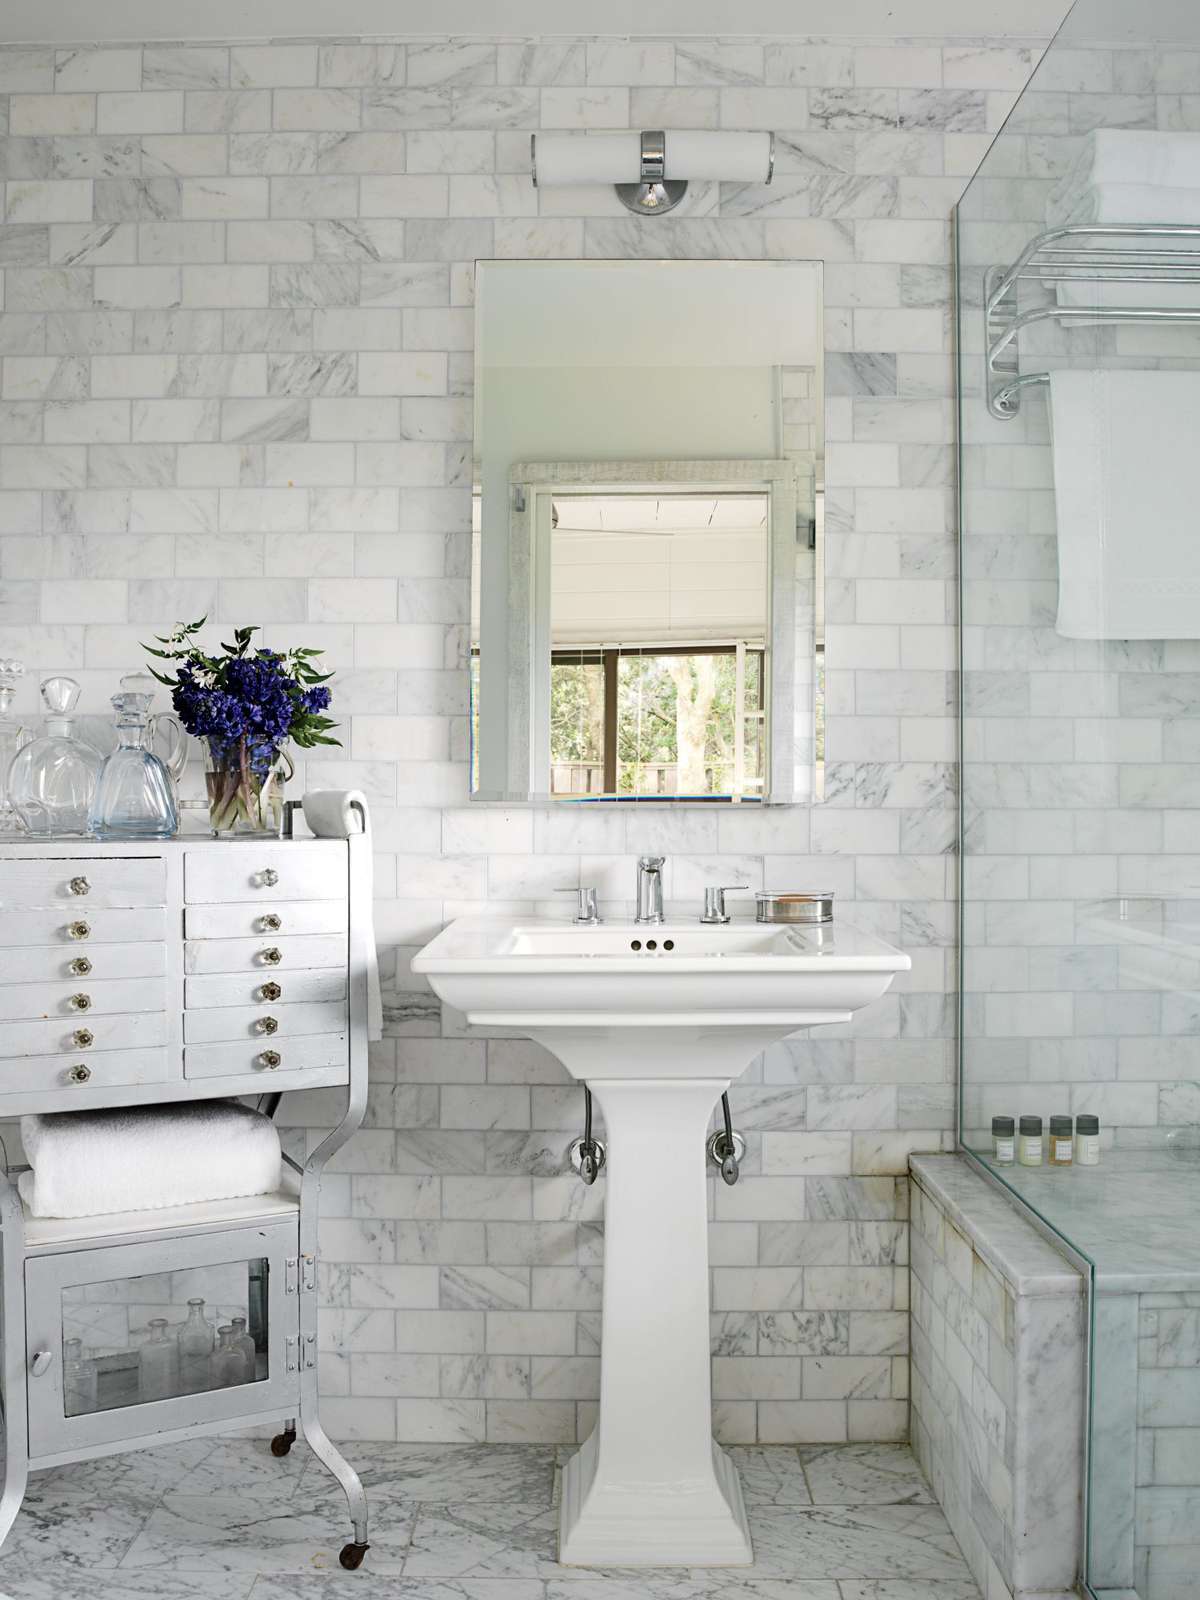 The floor and walls in this Fire Island bath are clad in Carrara marble (by Ann Sacks) tile to resist trapped moisture and tracked-in beach sand. The cool, monochromatic color scheme gives the room a soothing, spa-like feel.